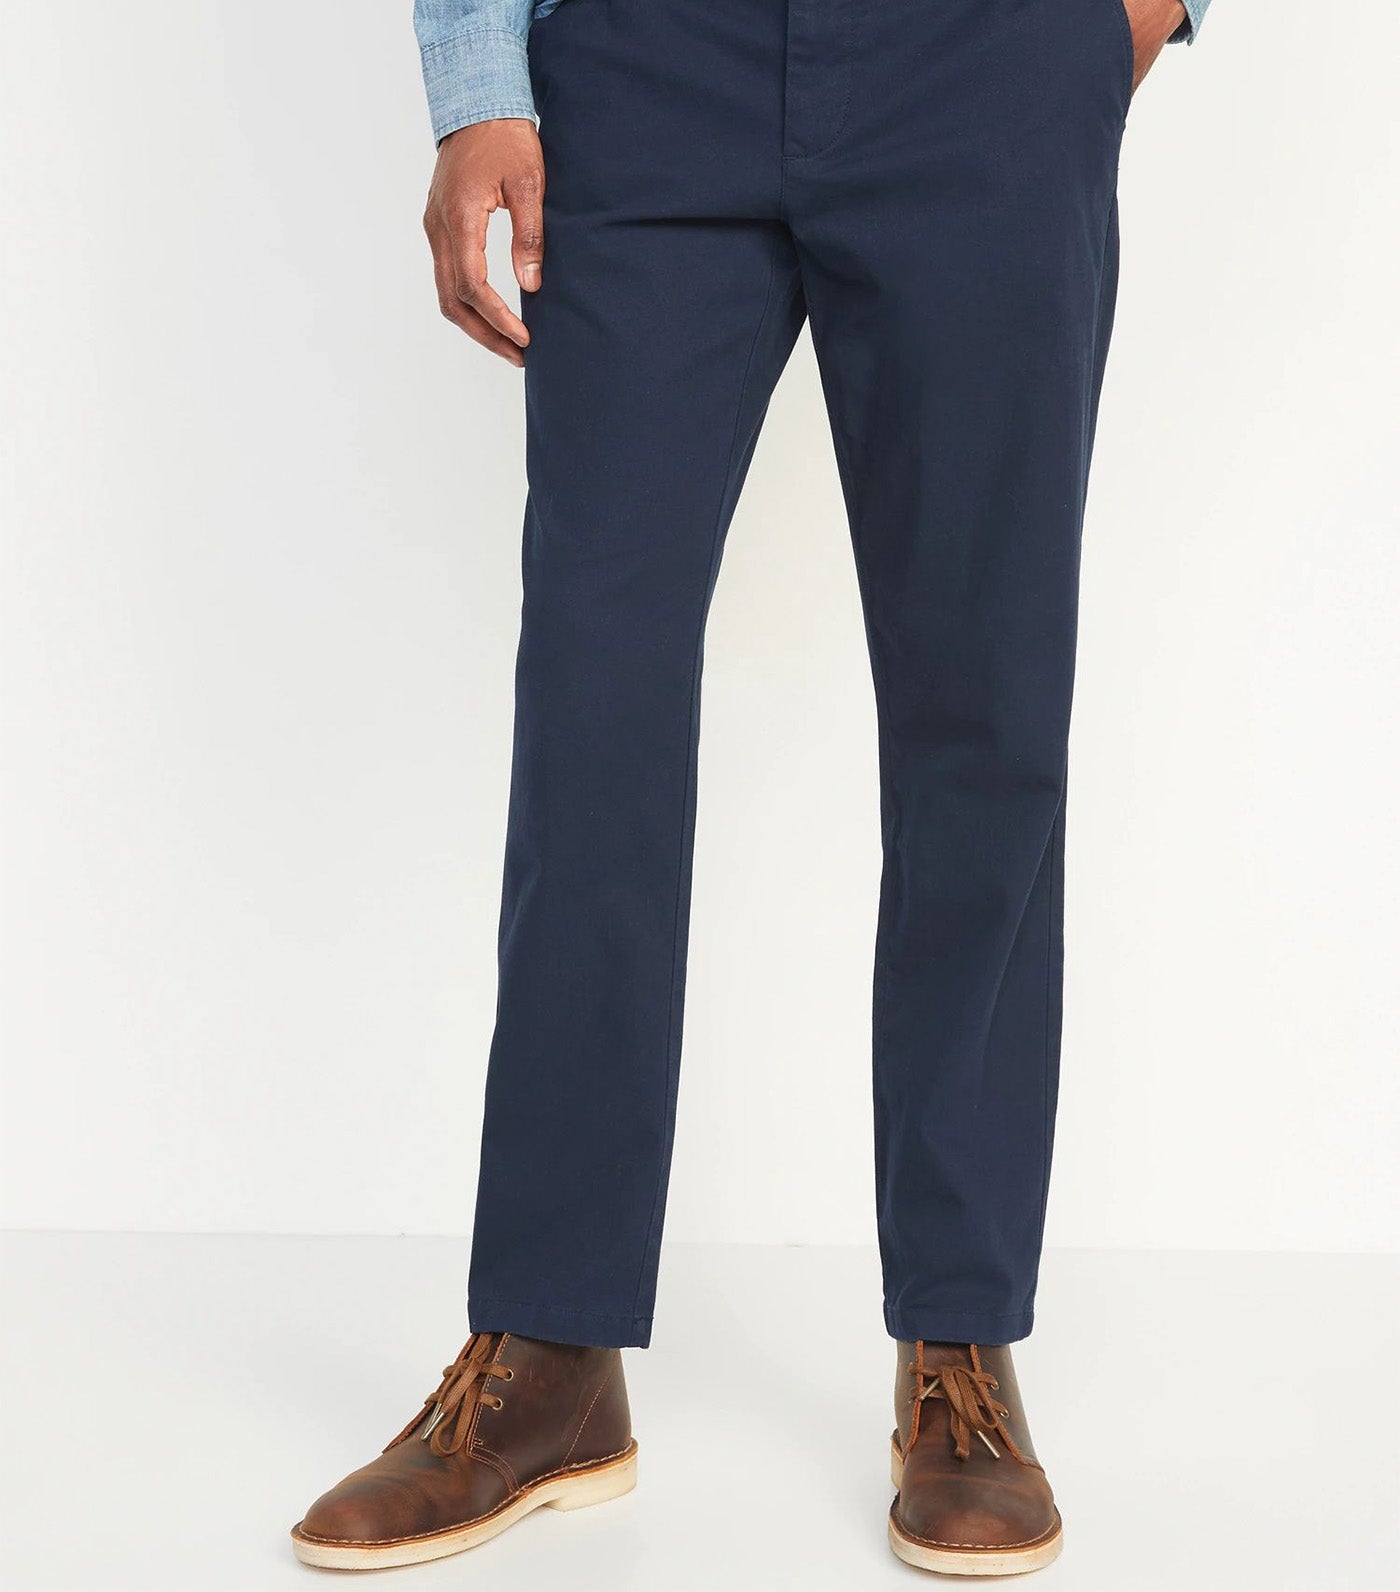 Straight Built-In Flex Rotation Chino Pants for Men In The Navy